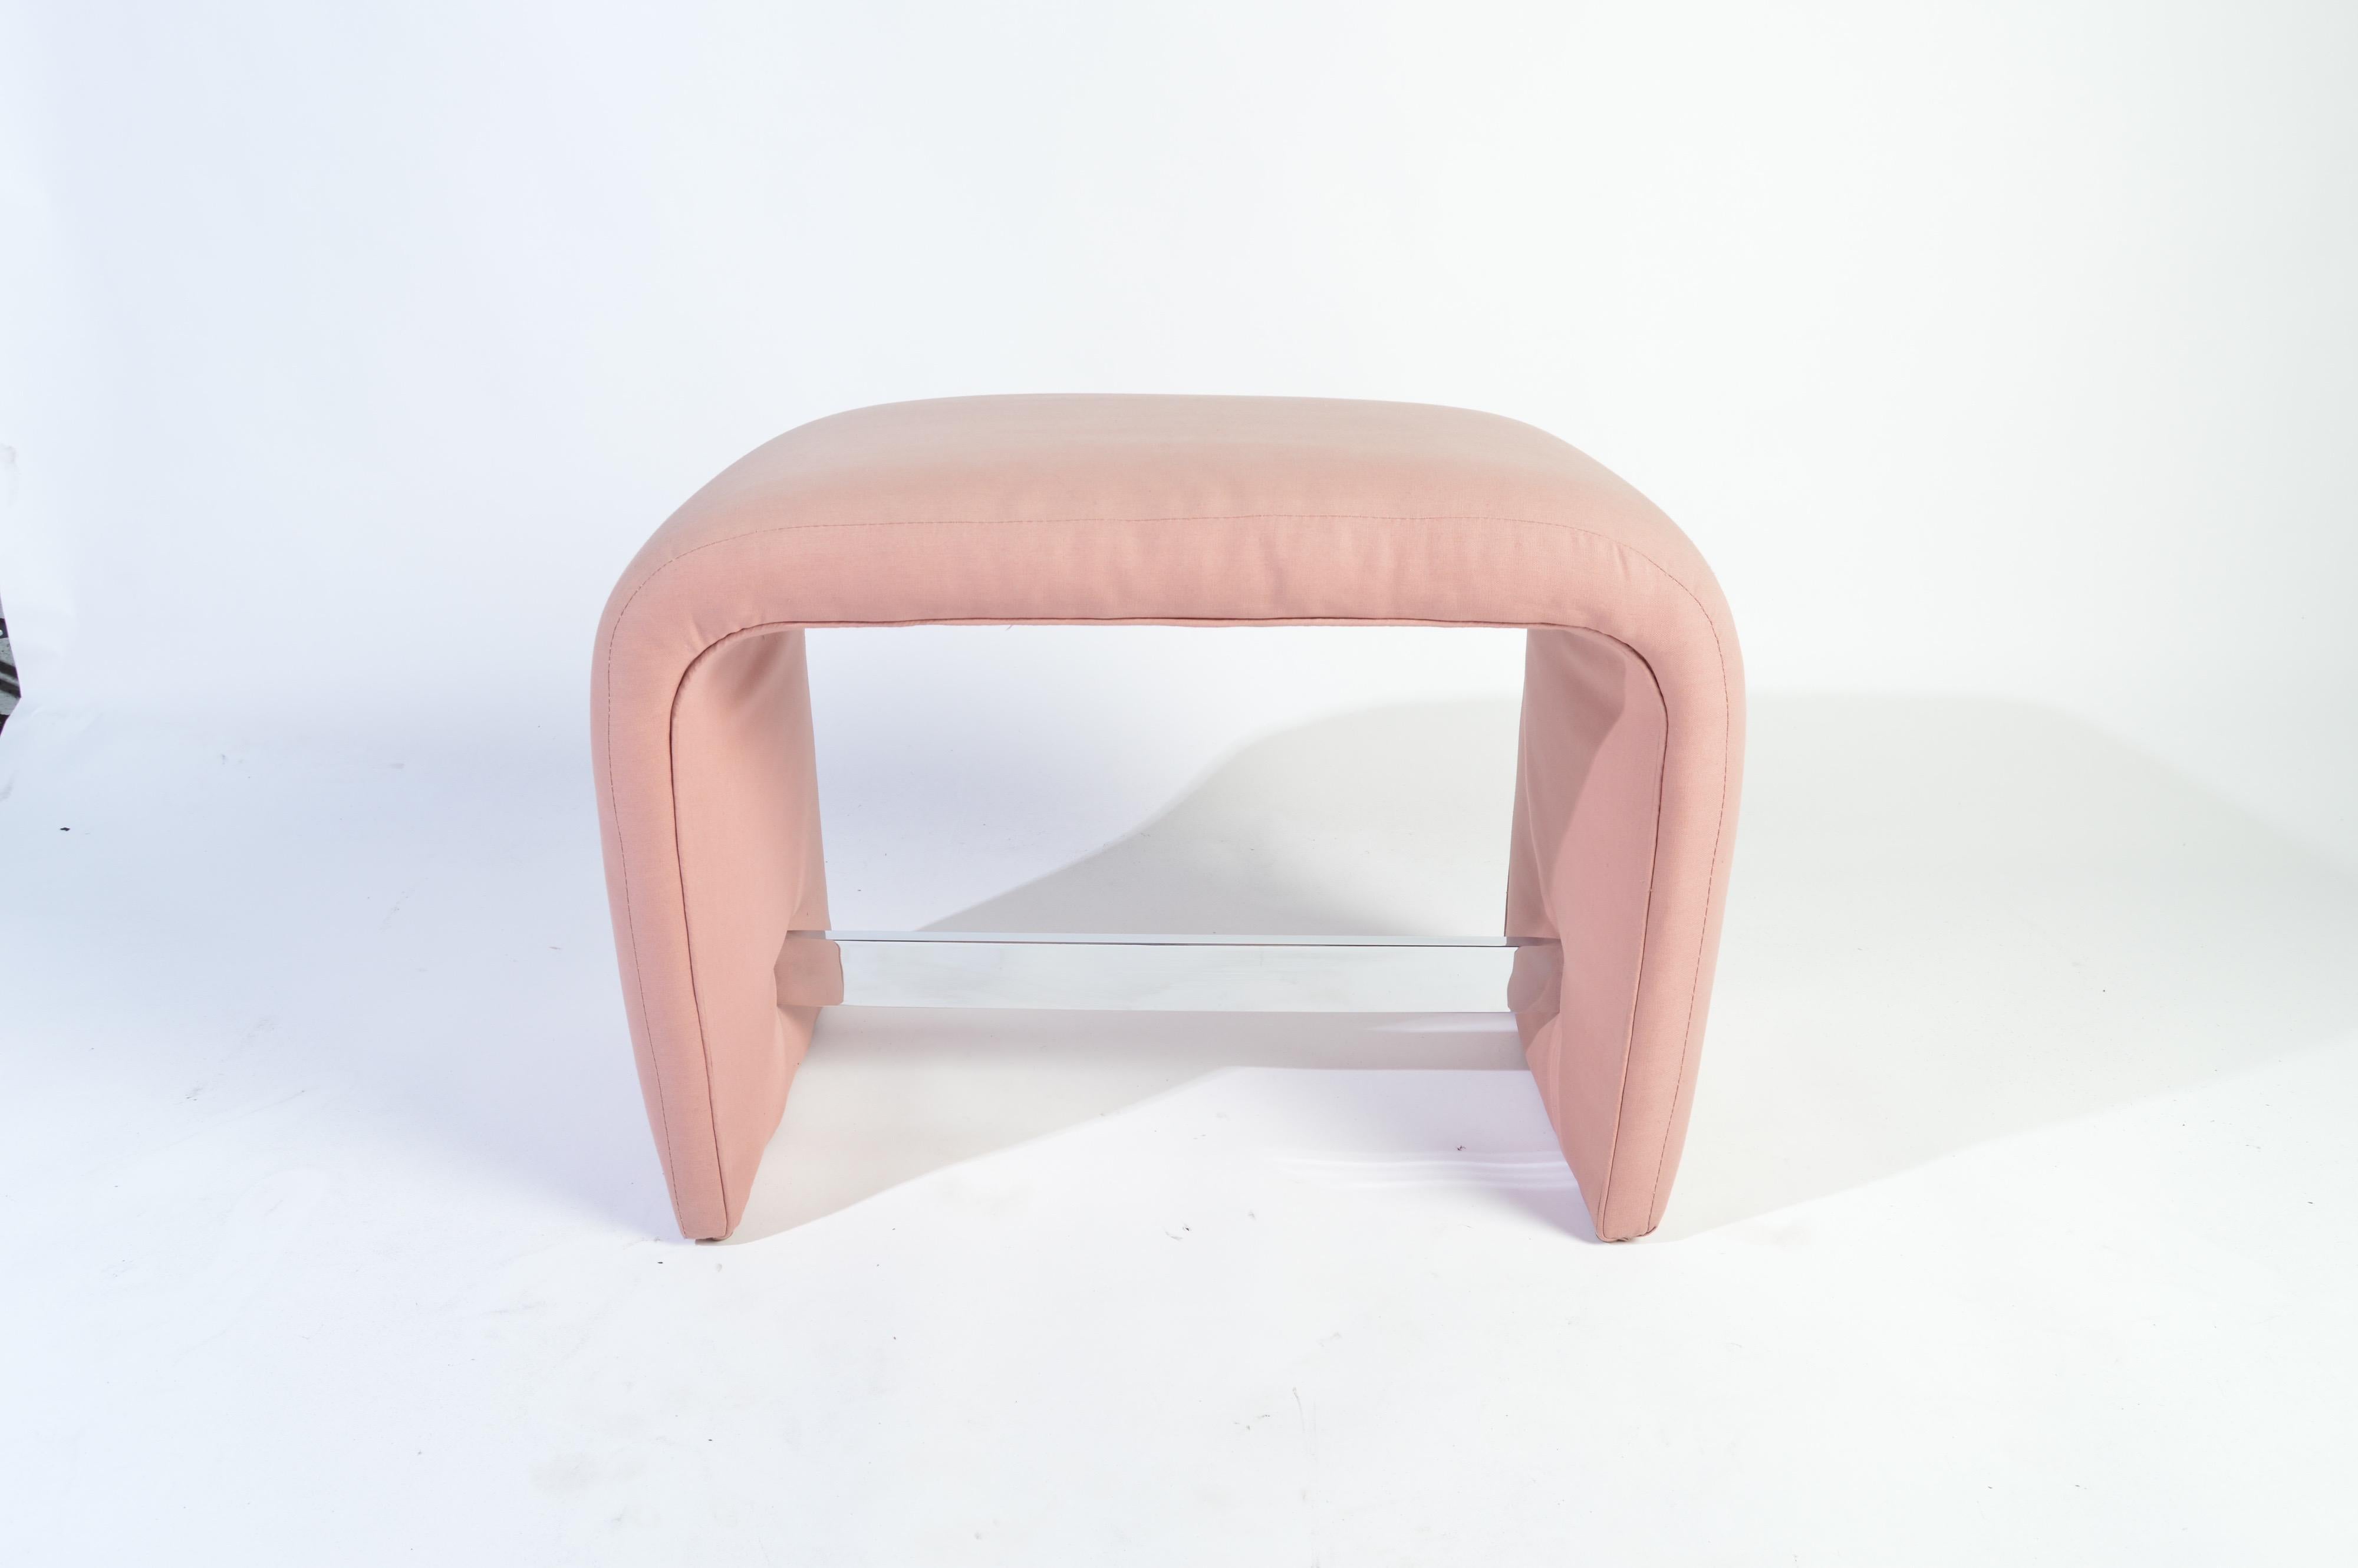 Milo Baughman waterfall ottoman bench having chrome stretcher in original soft pink cotton upholstery. Beautiful condition. Ready for use!